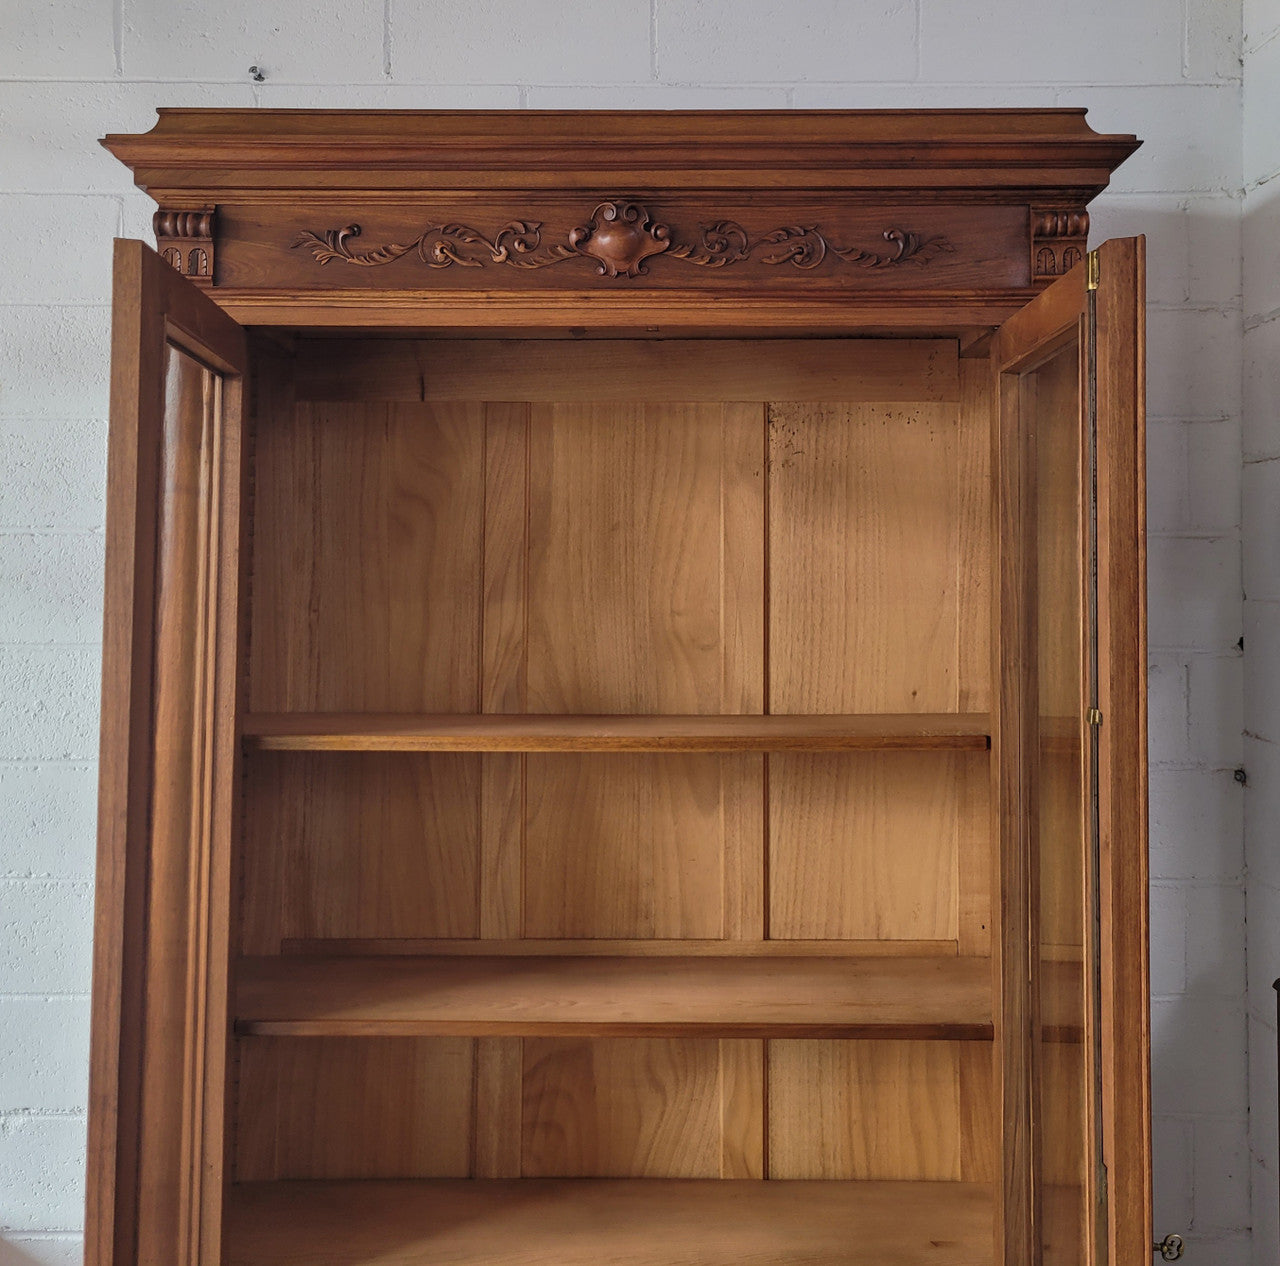 Stunning French Walnut Henry II style two door bookcase with four fully adjustable shelves. The lock on the door is functional and has a key. It is in good original detailed condition.